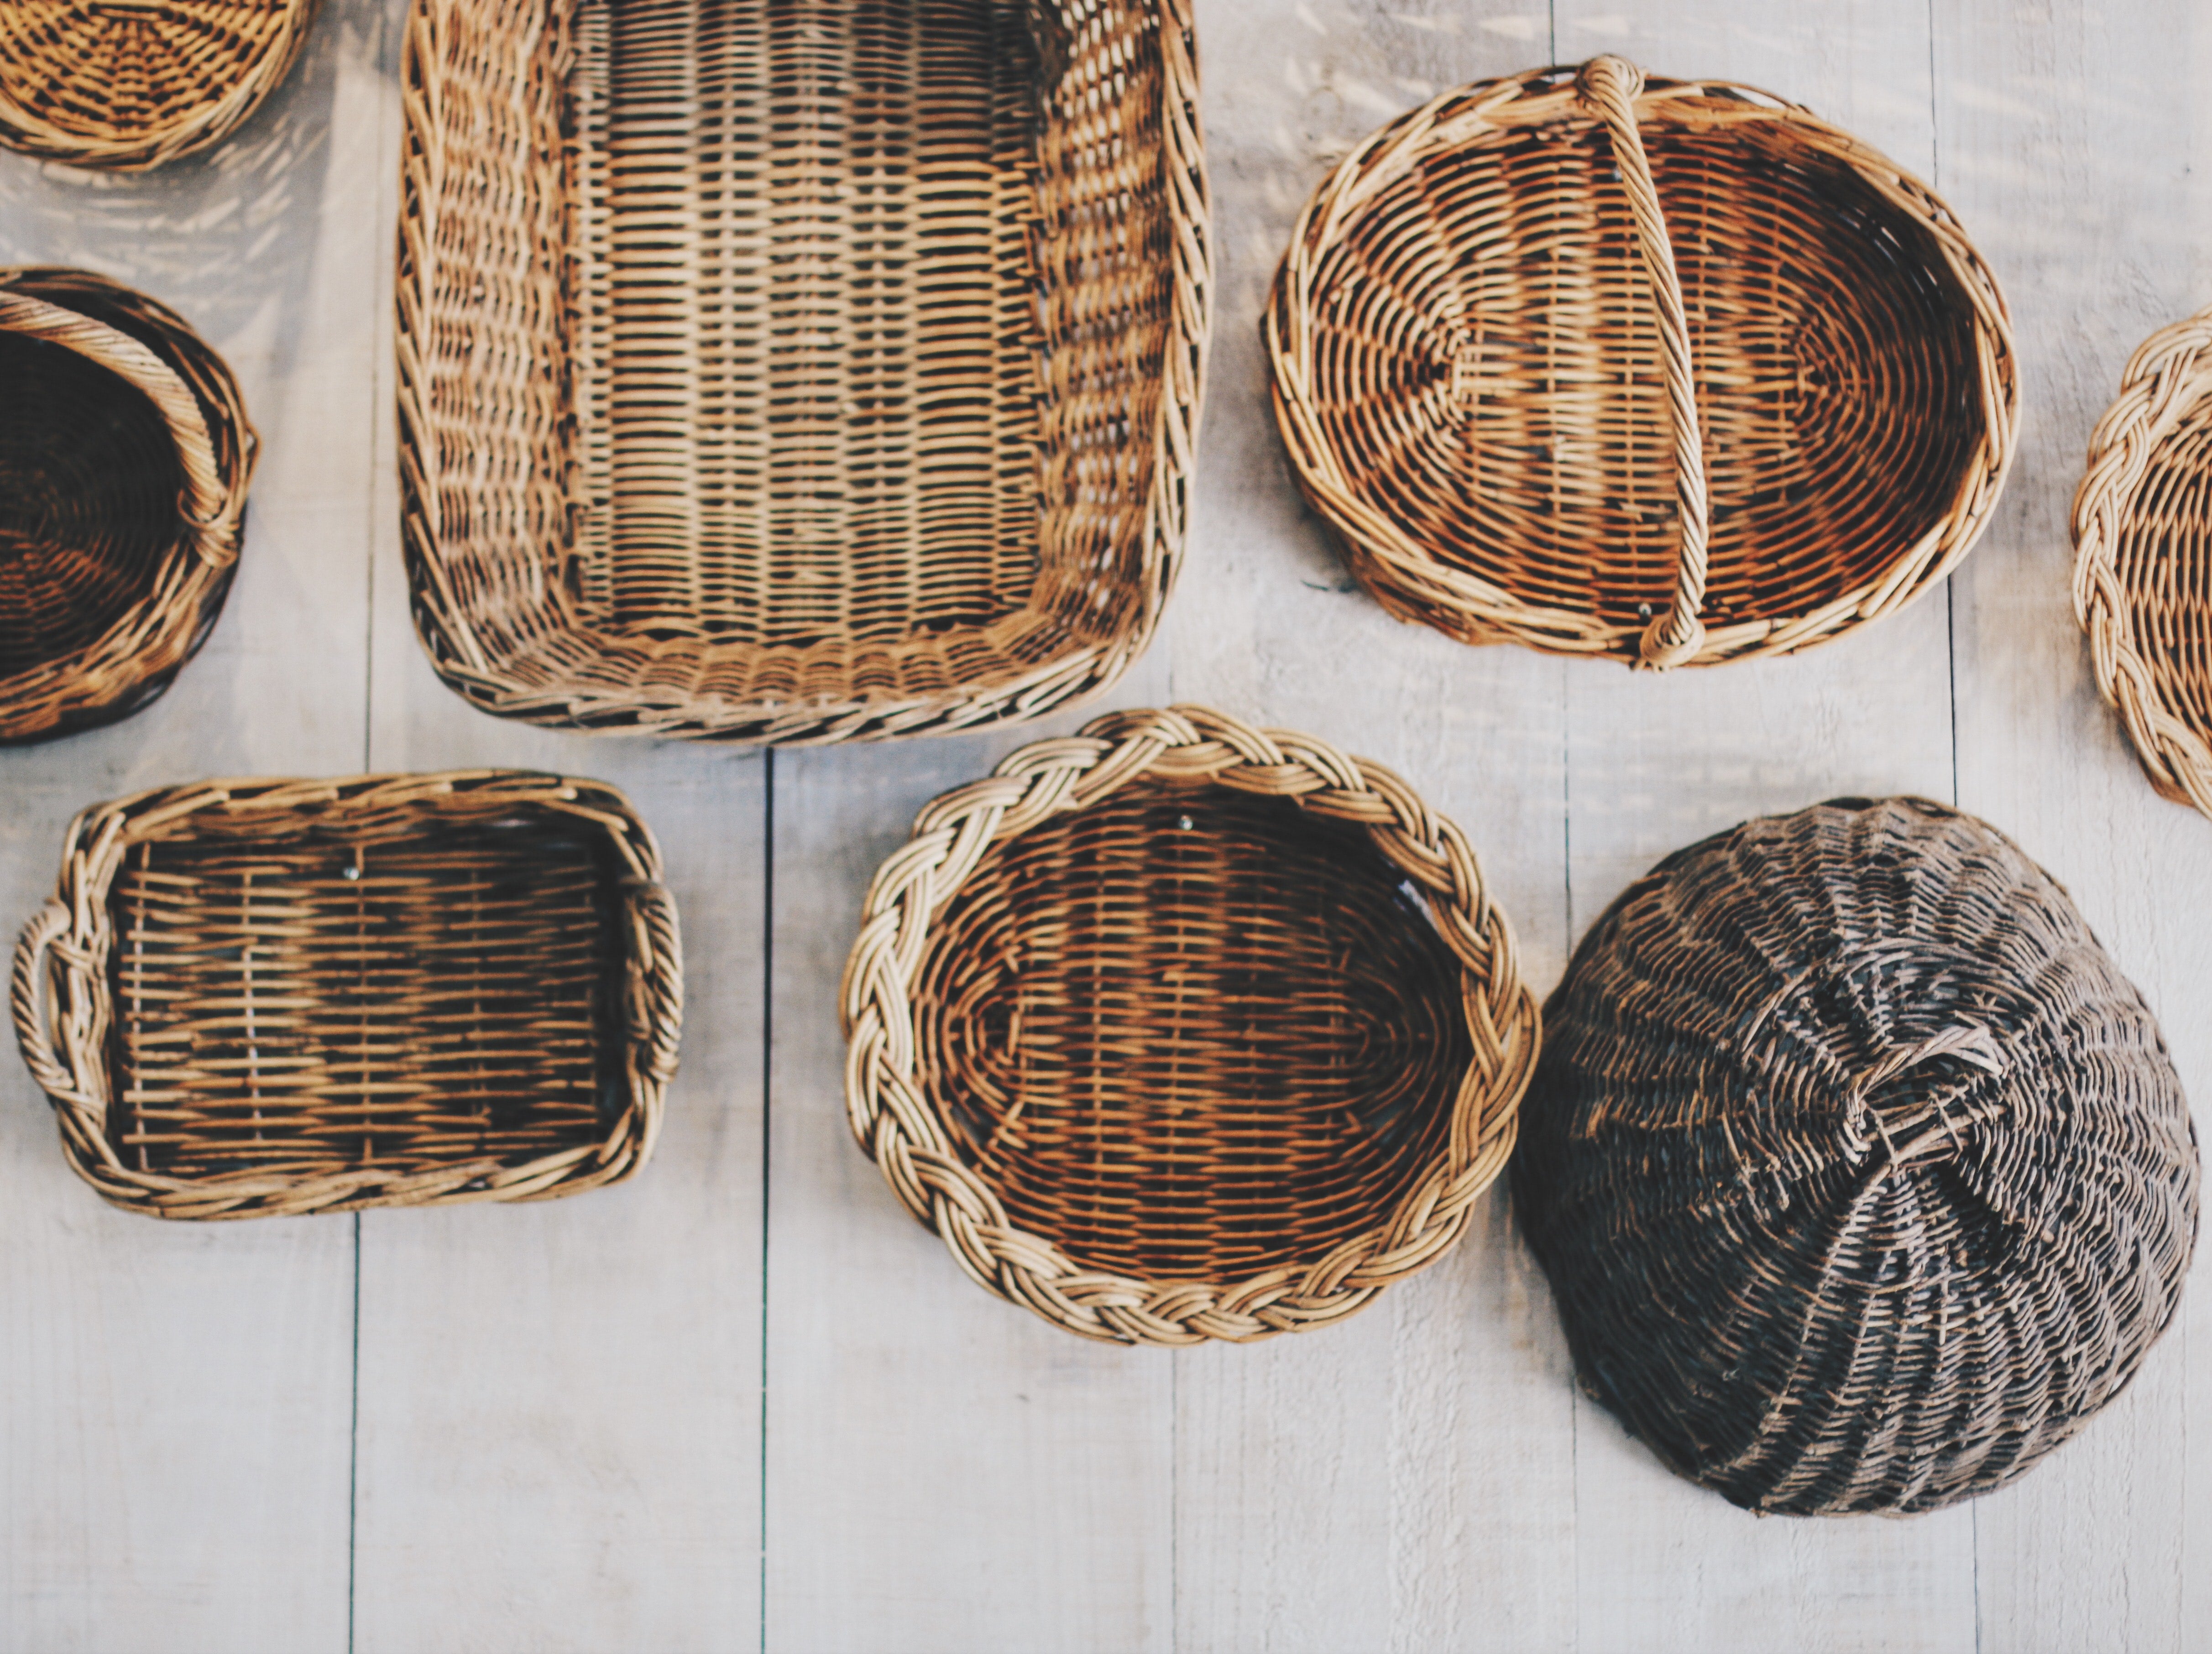 Woven into the Fabric of Time - A History of Wicker